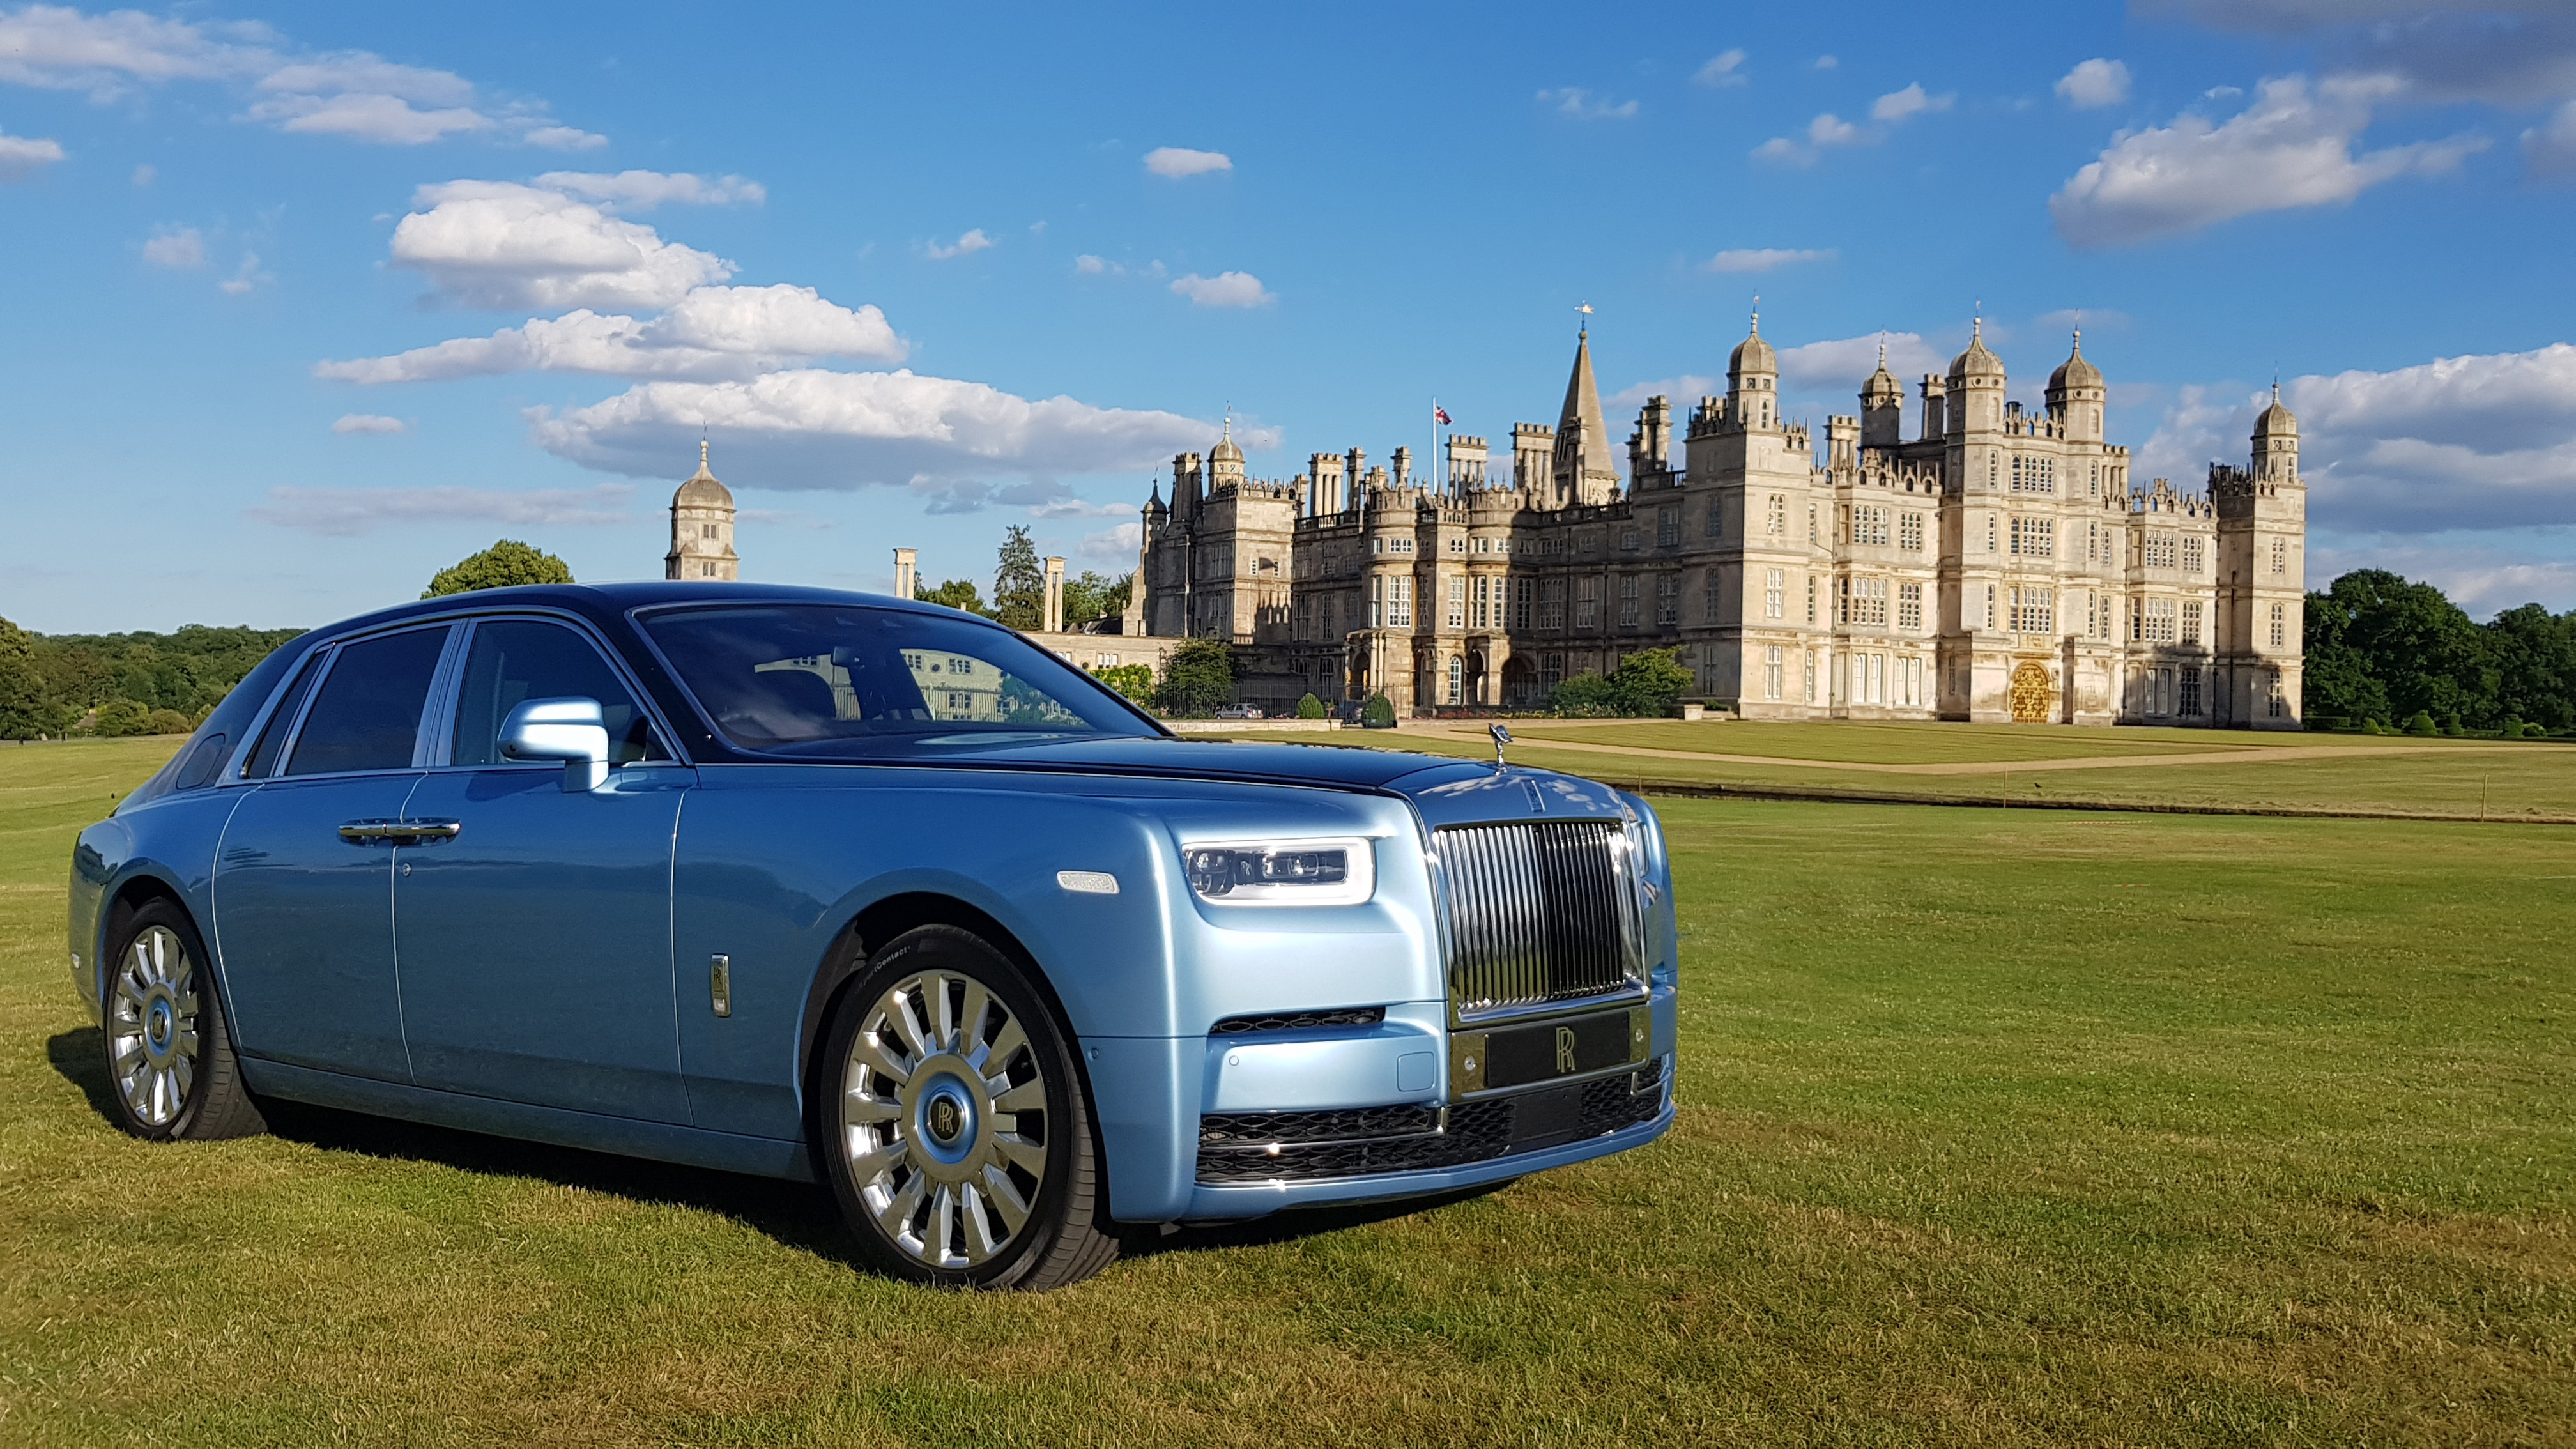 Car Rolls Royce Luxury Cars British Cars Frontal View Headlights Sky Clouds Grass Castle Trees 4032x2268